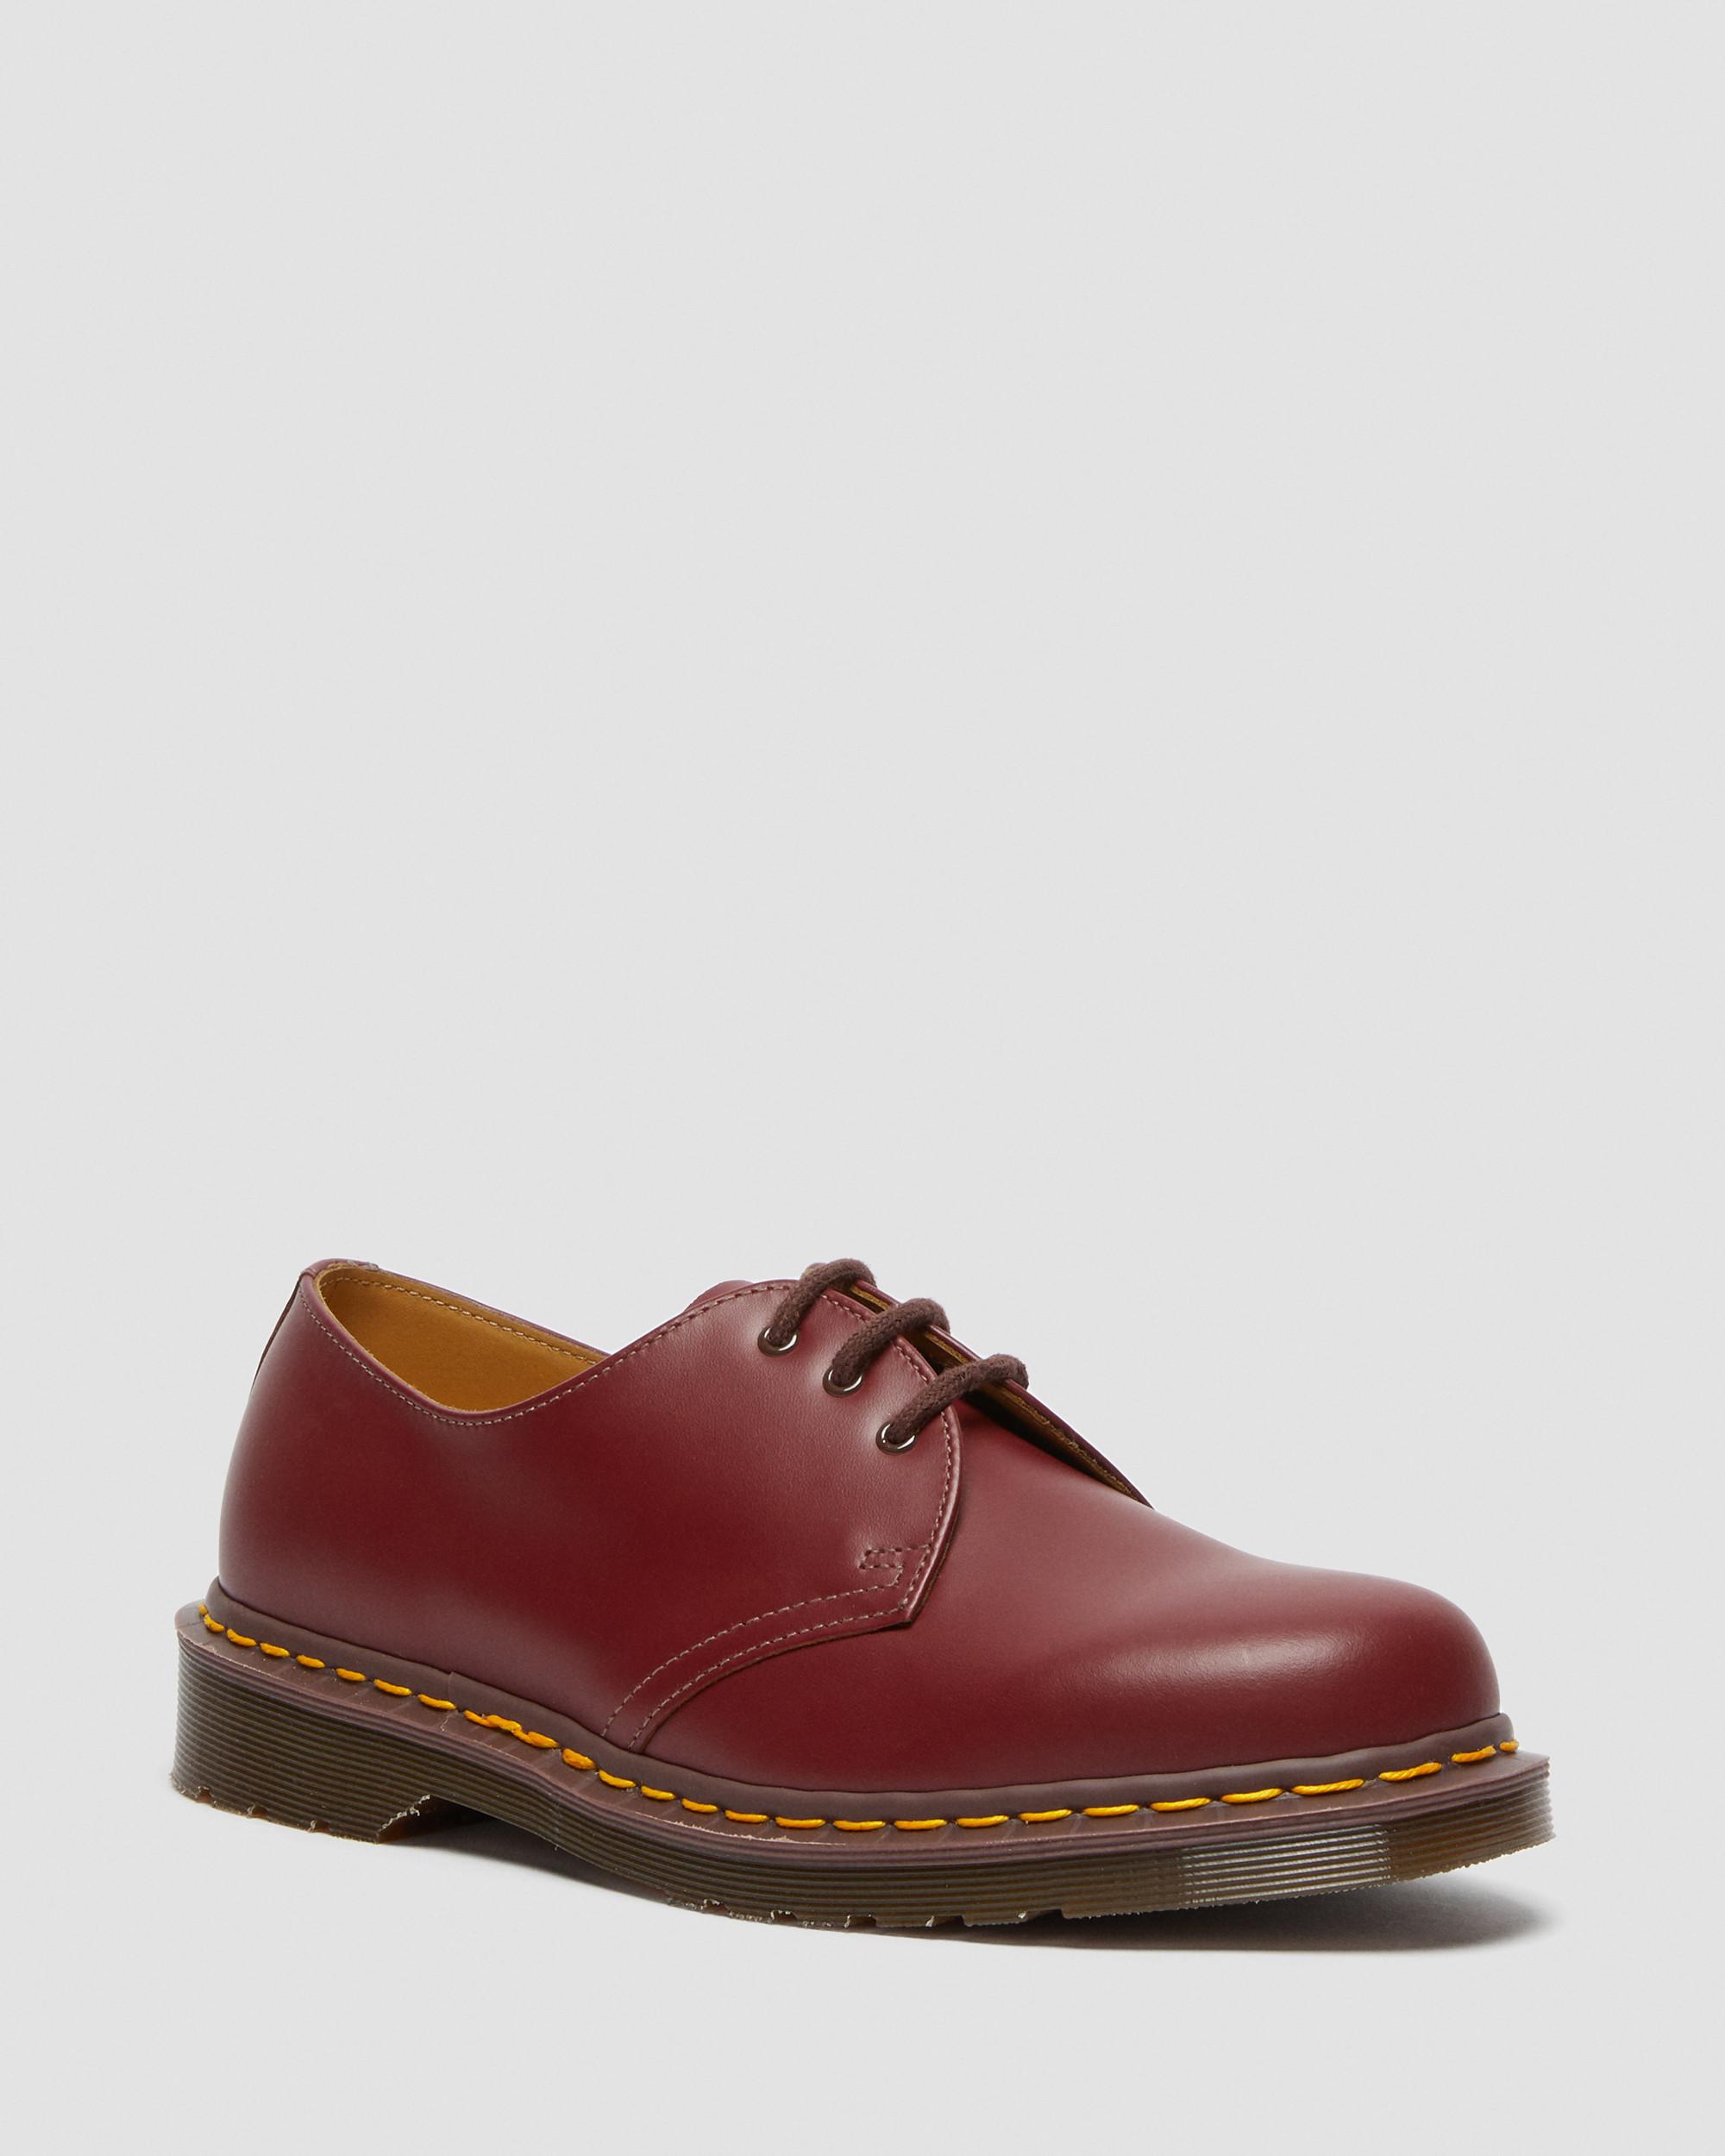 Vintage Made in England Oxford Shoes | Dr. Martens